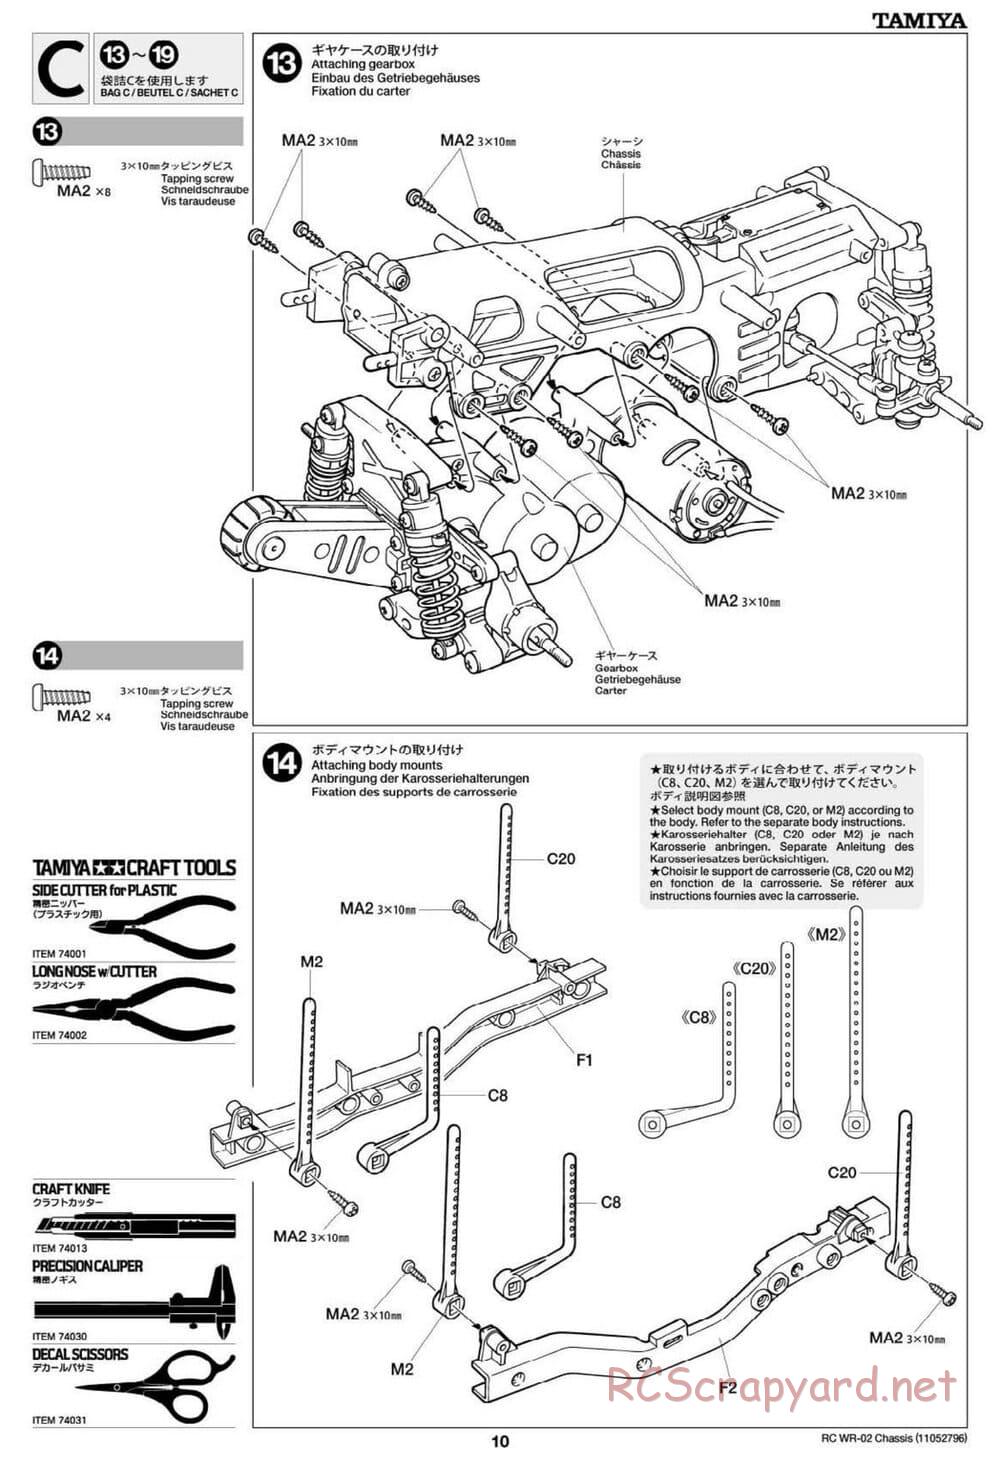 Tamiya - VW Type 2 Wheelie (T1) - WR-02 Chassis - Manual - Page 10